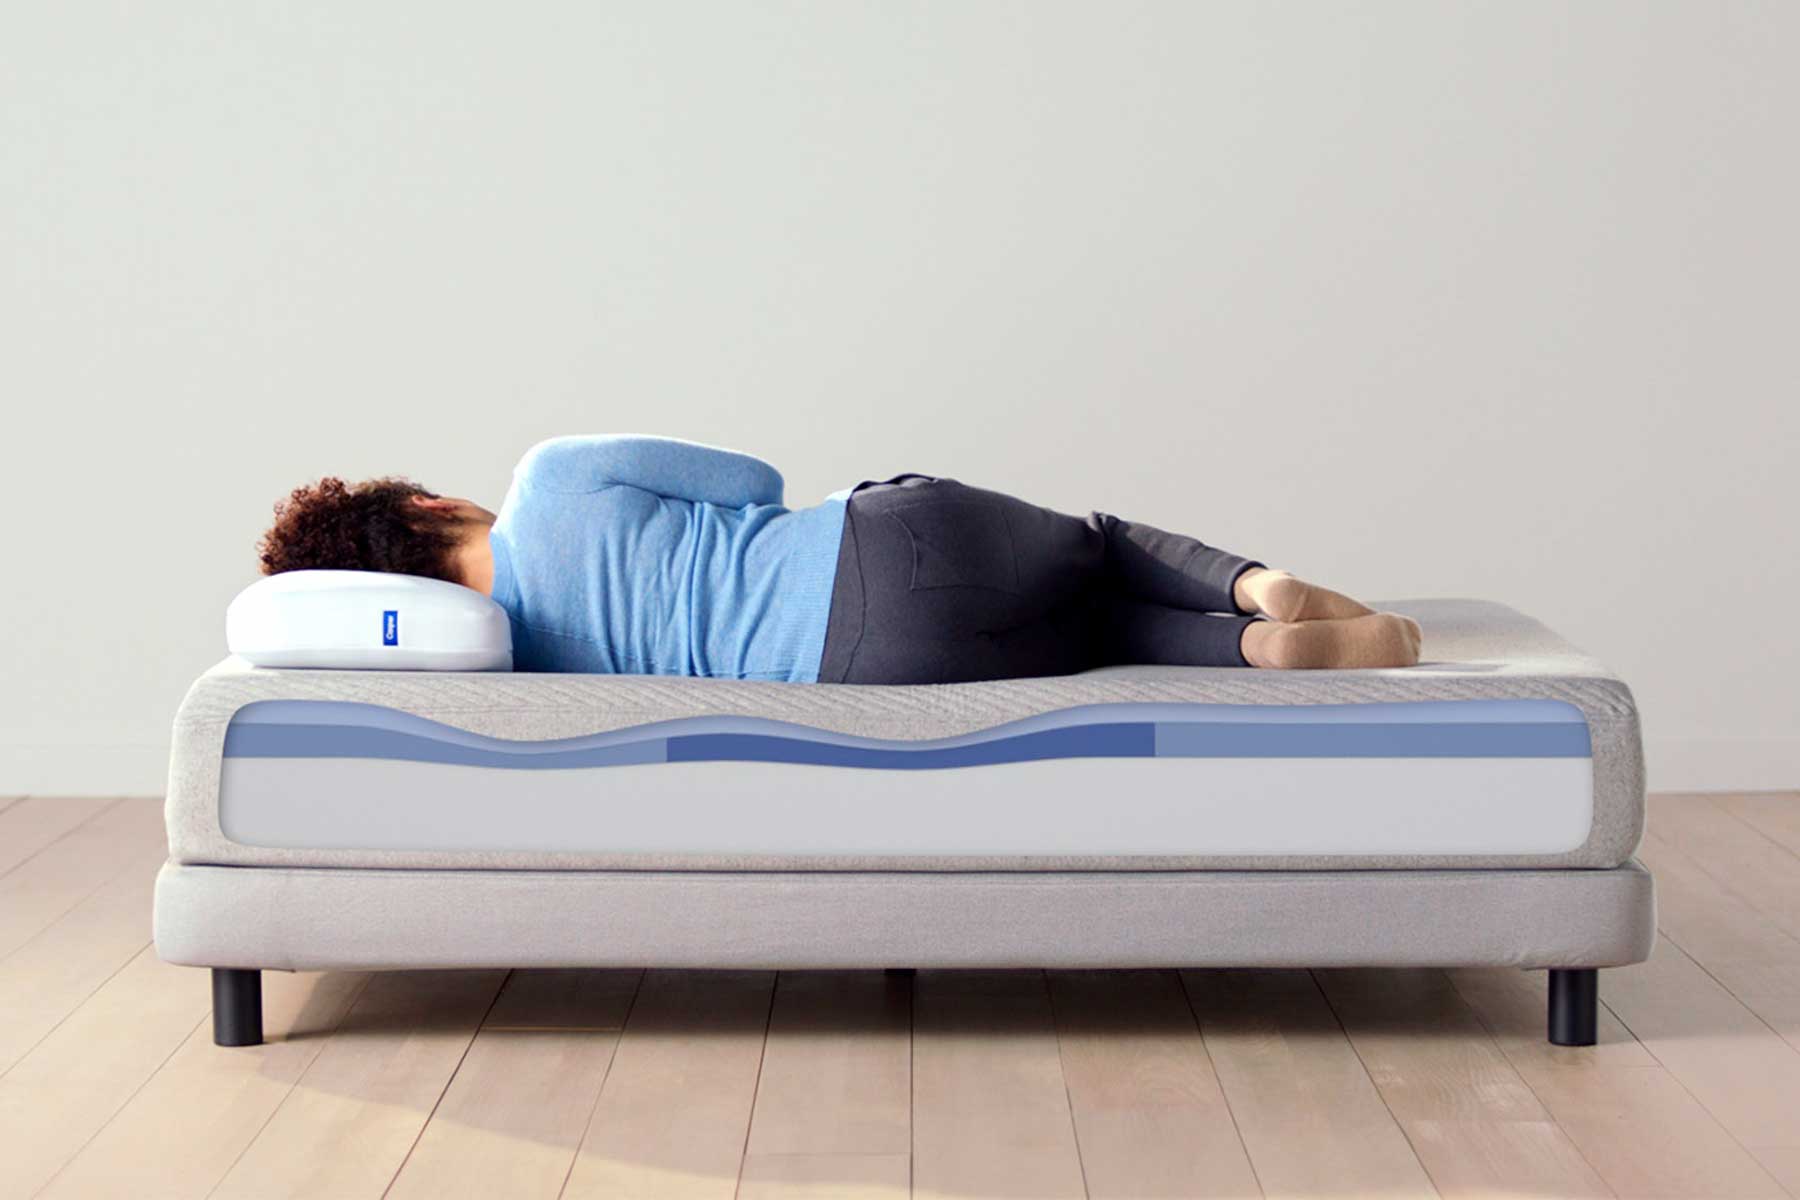 Casper Wave Mattress Review 2020: I Have Back Problems, and This ...